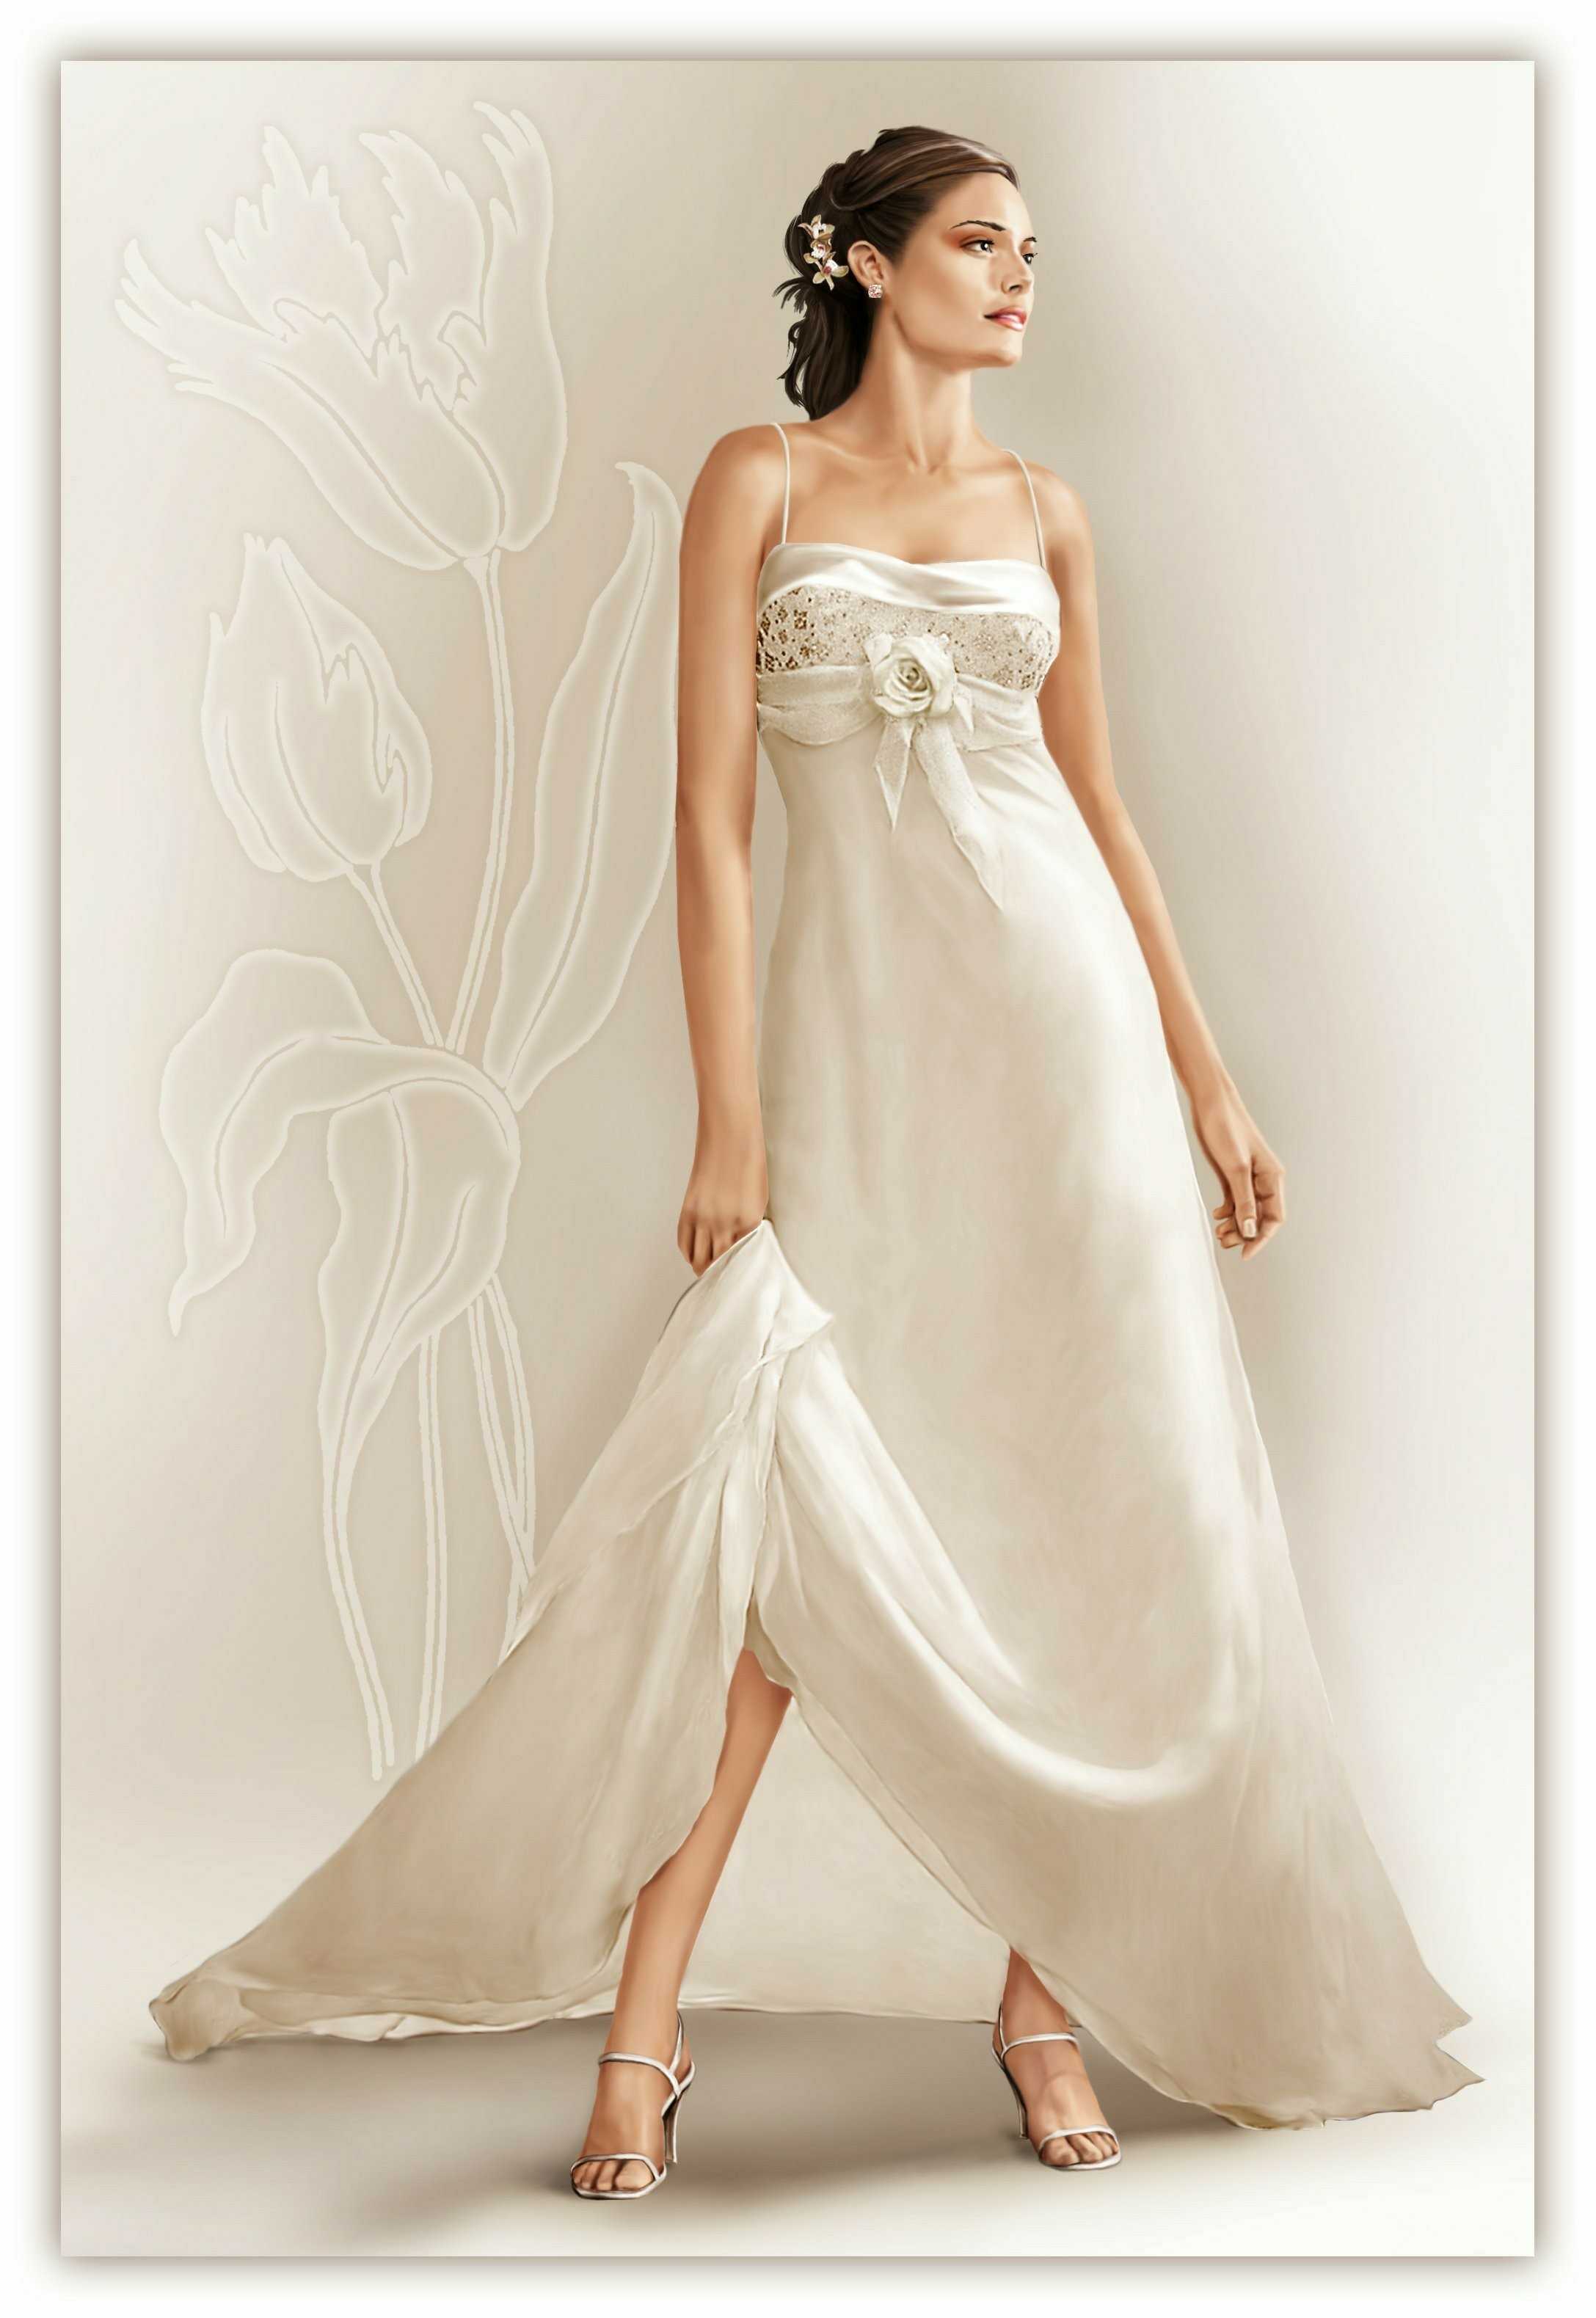 Wedding Dress With MultiLayered Assymetrical Skirt